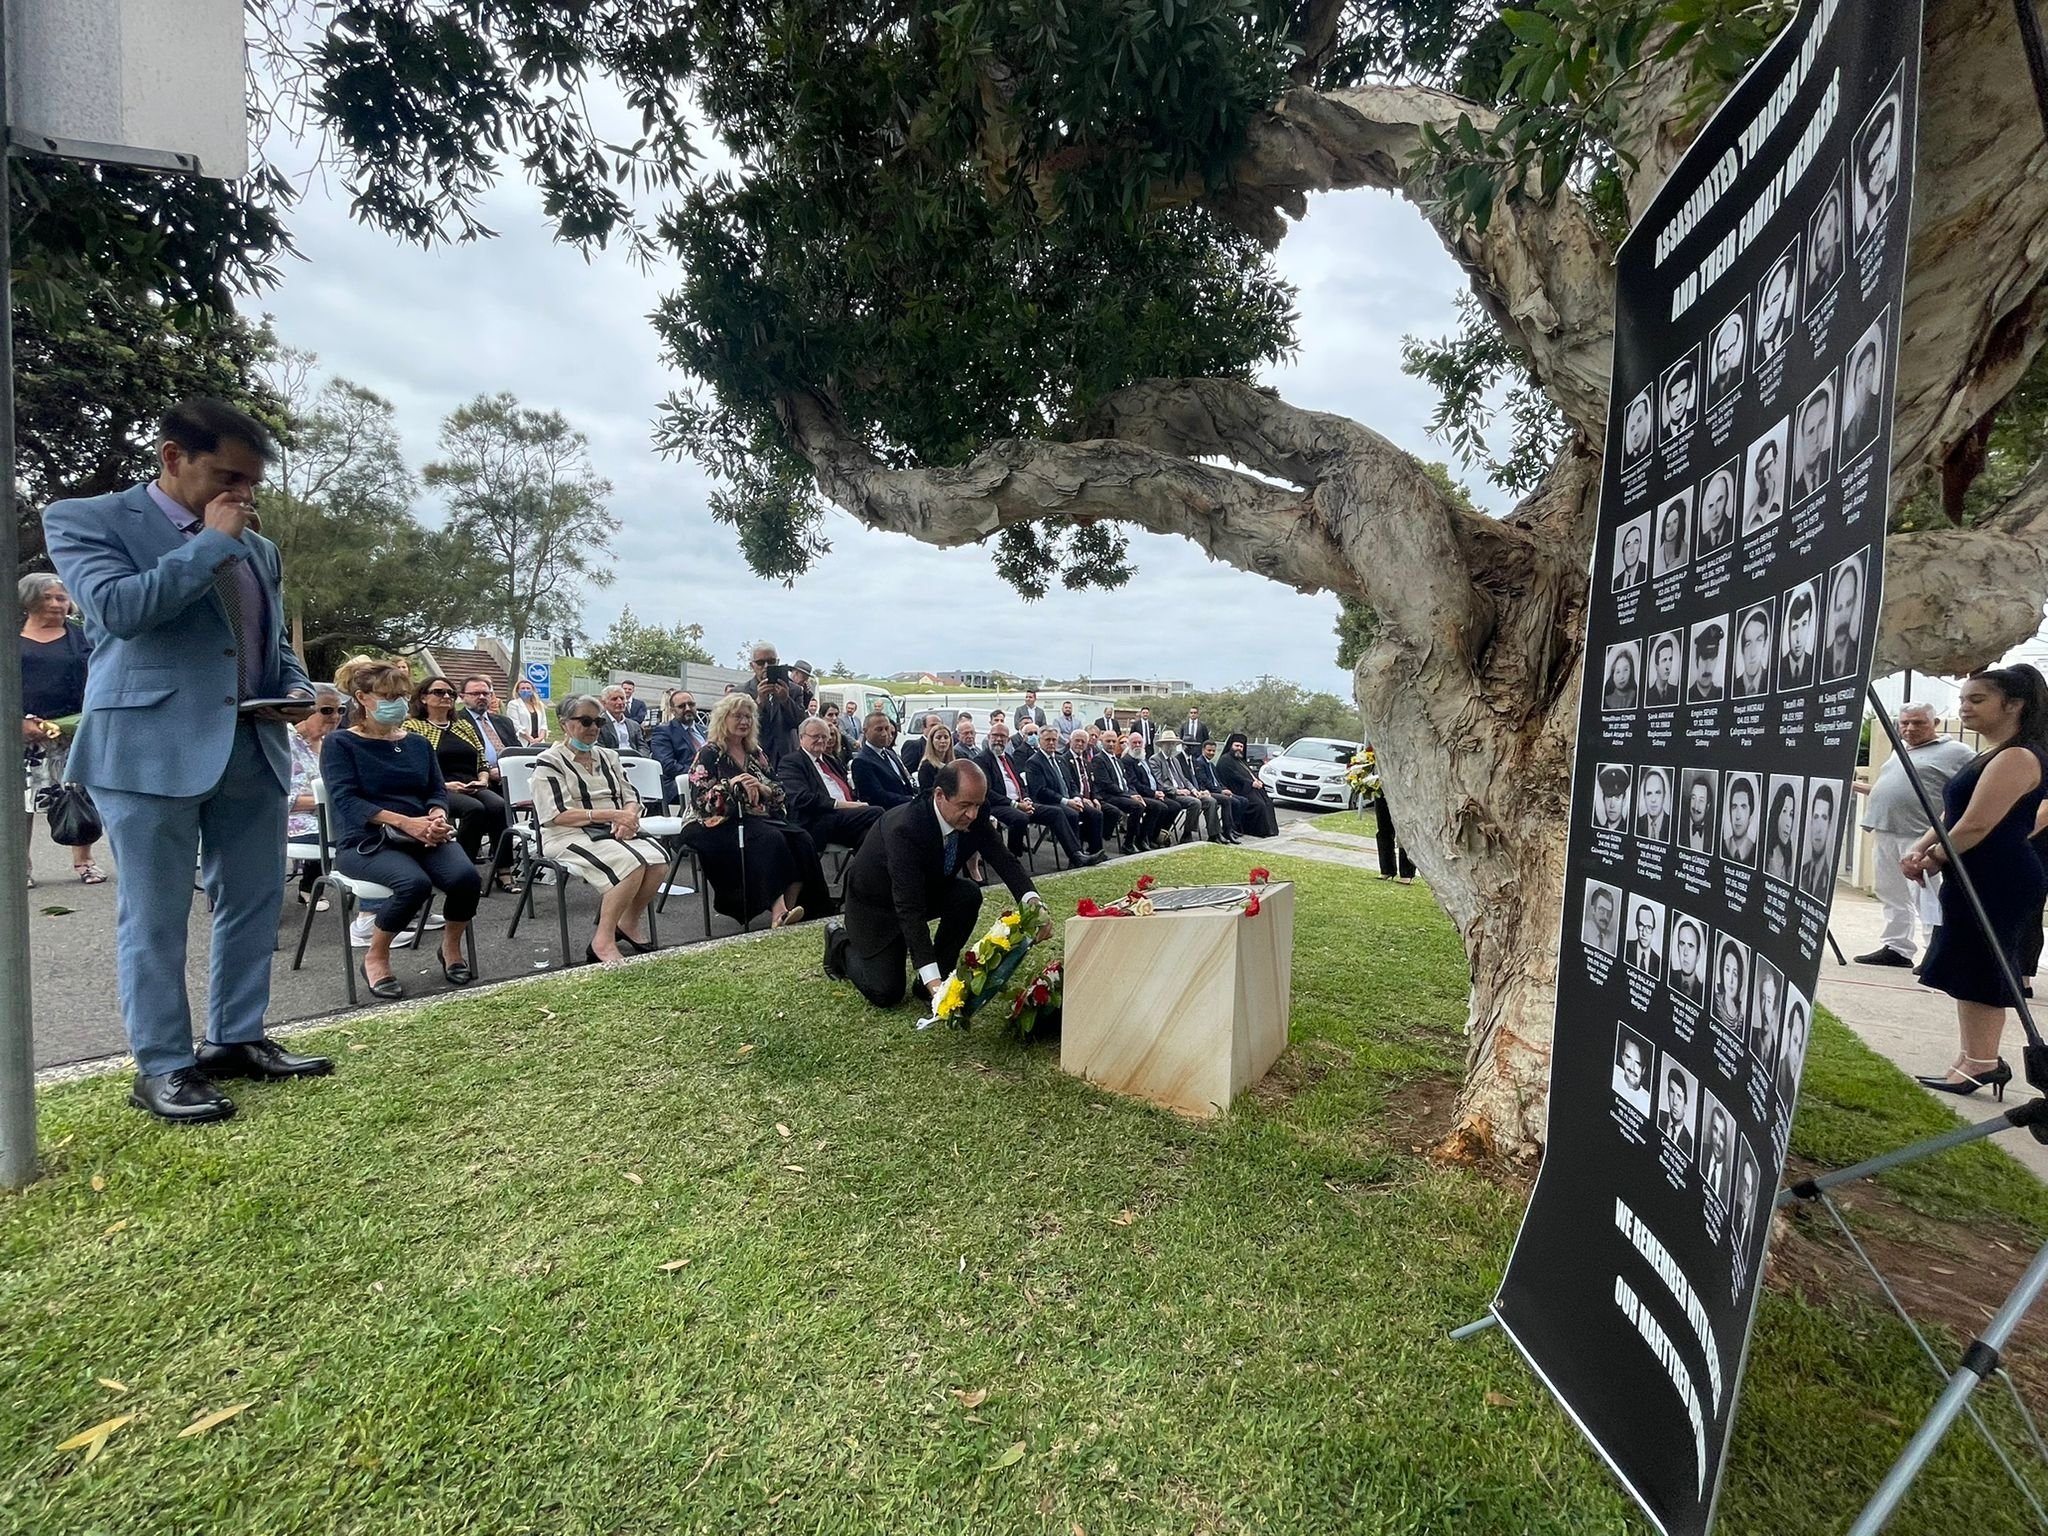 A panel displaying some of the Turkish diplomats murdered by Armenian terrorists (L), as people pay their respects to the victims at a ceremony honoring the dead, Sydney, Australia, Dec. 17, 2021. (AA Photo)